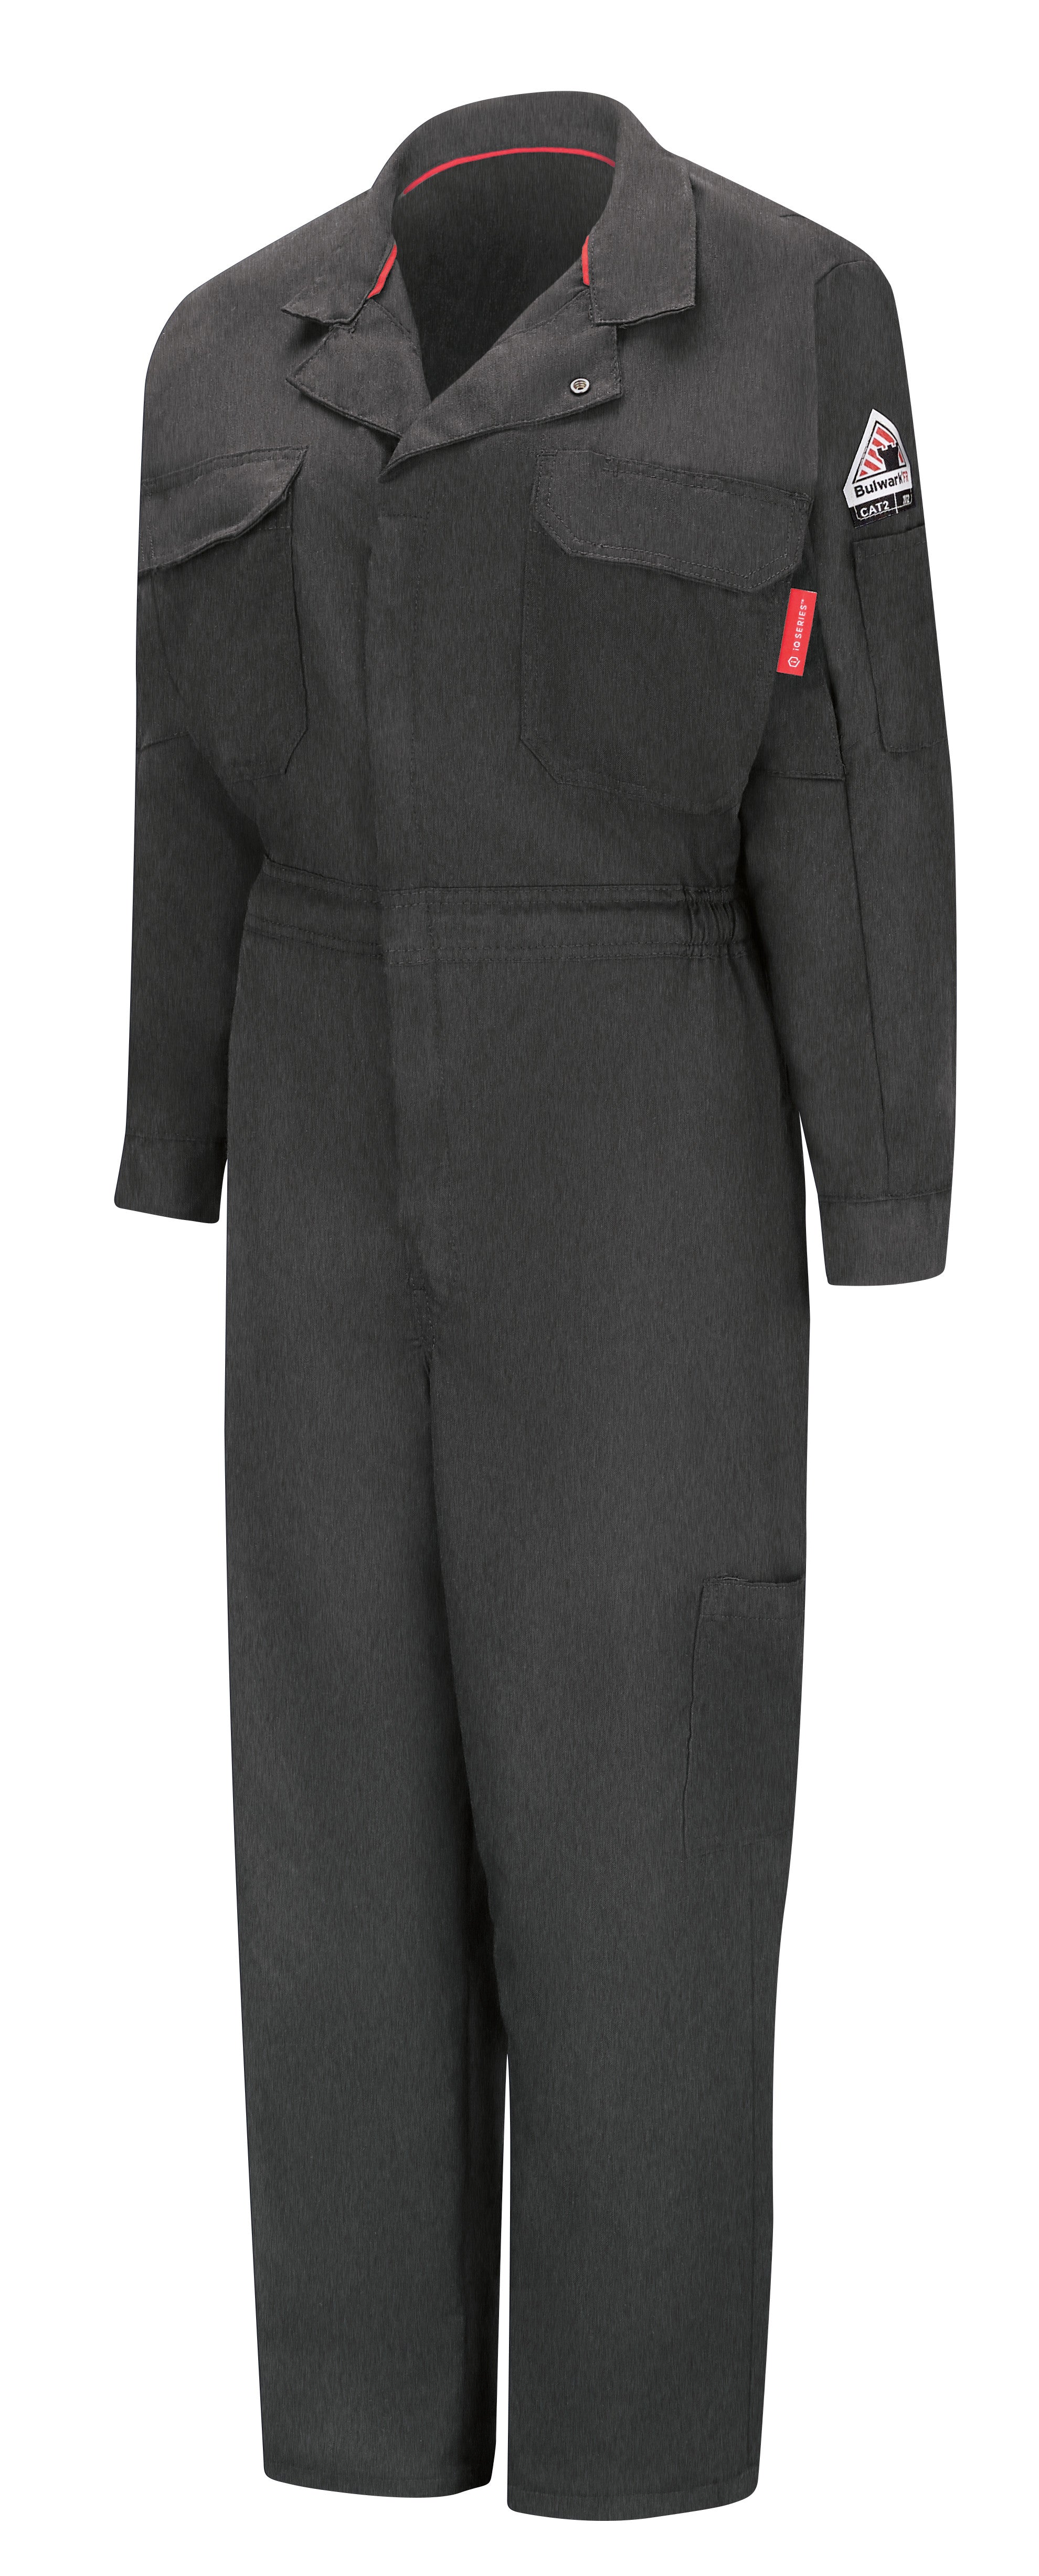 iQ Series® Women's Mobility Coverall with Insect Shield QC21 - Dark Grey-eSafety Supplies, Inc